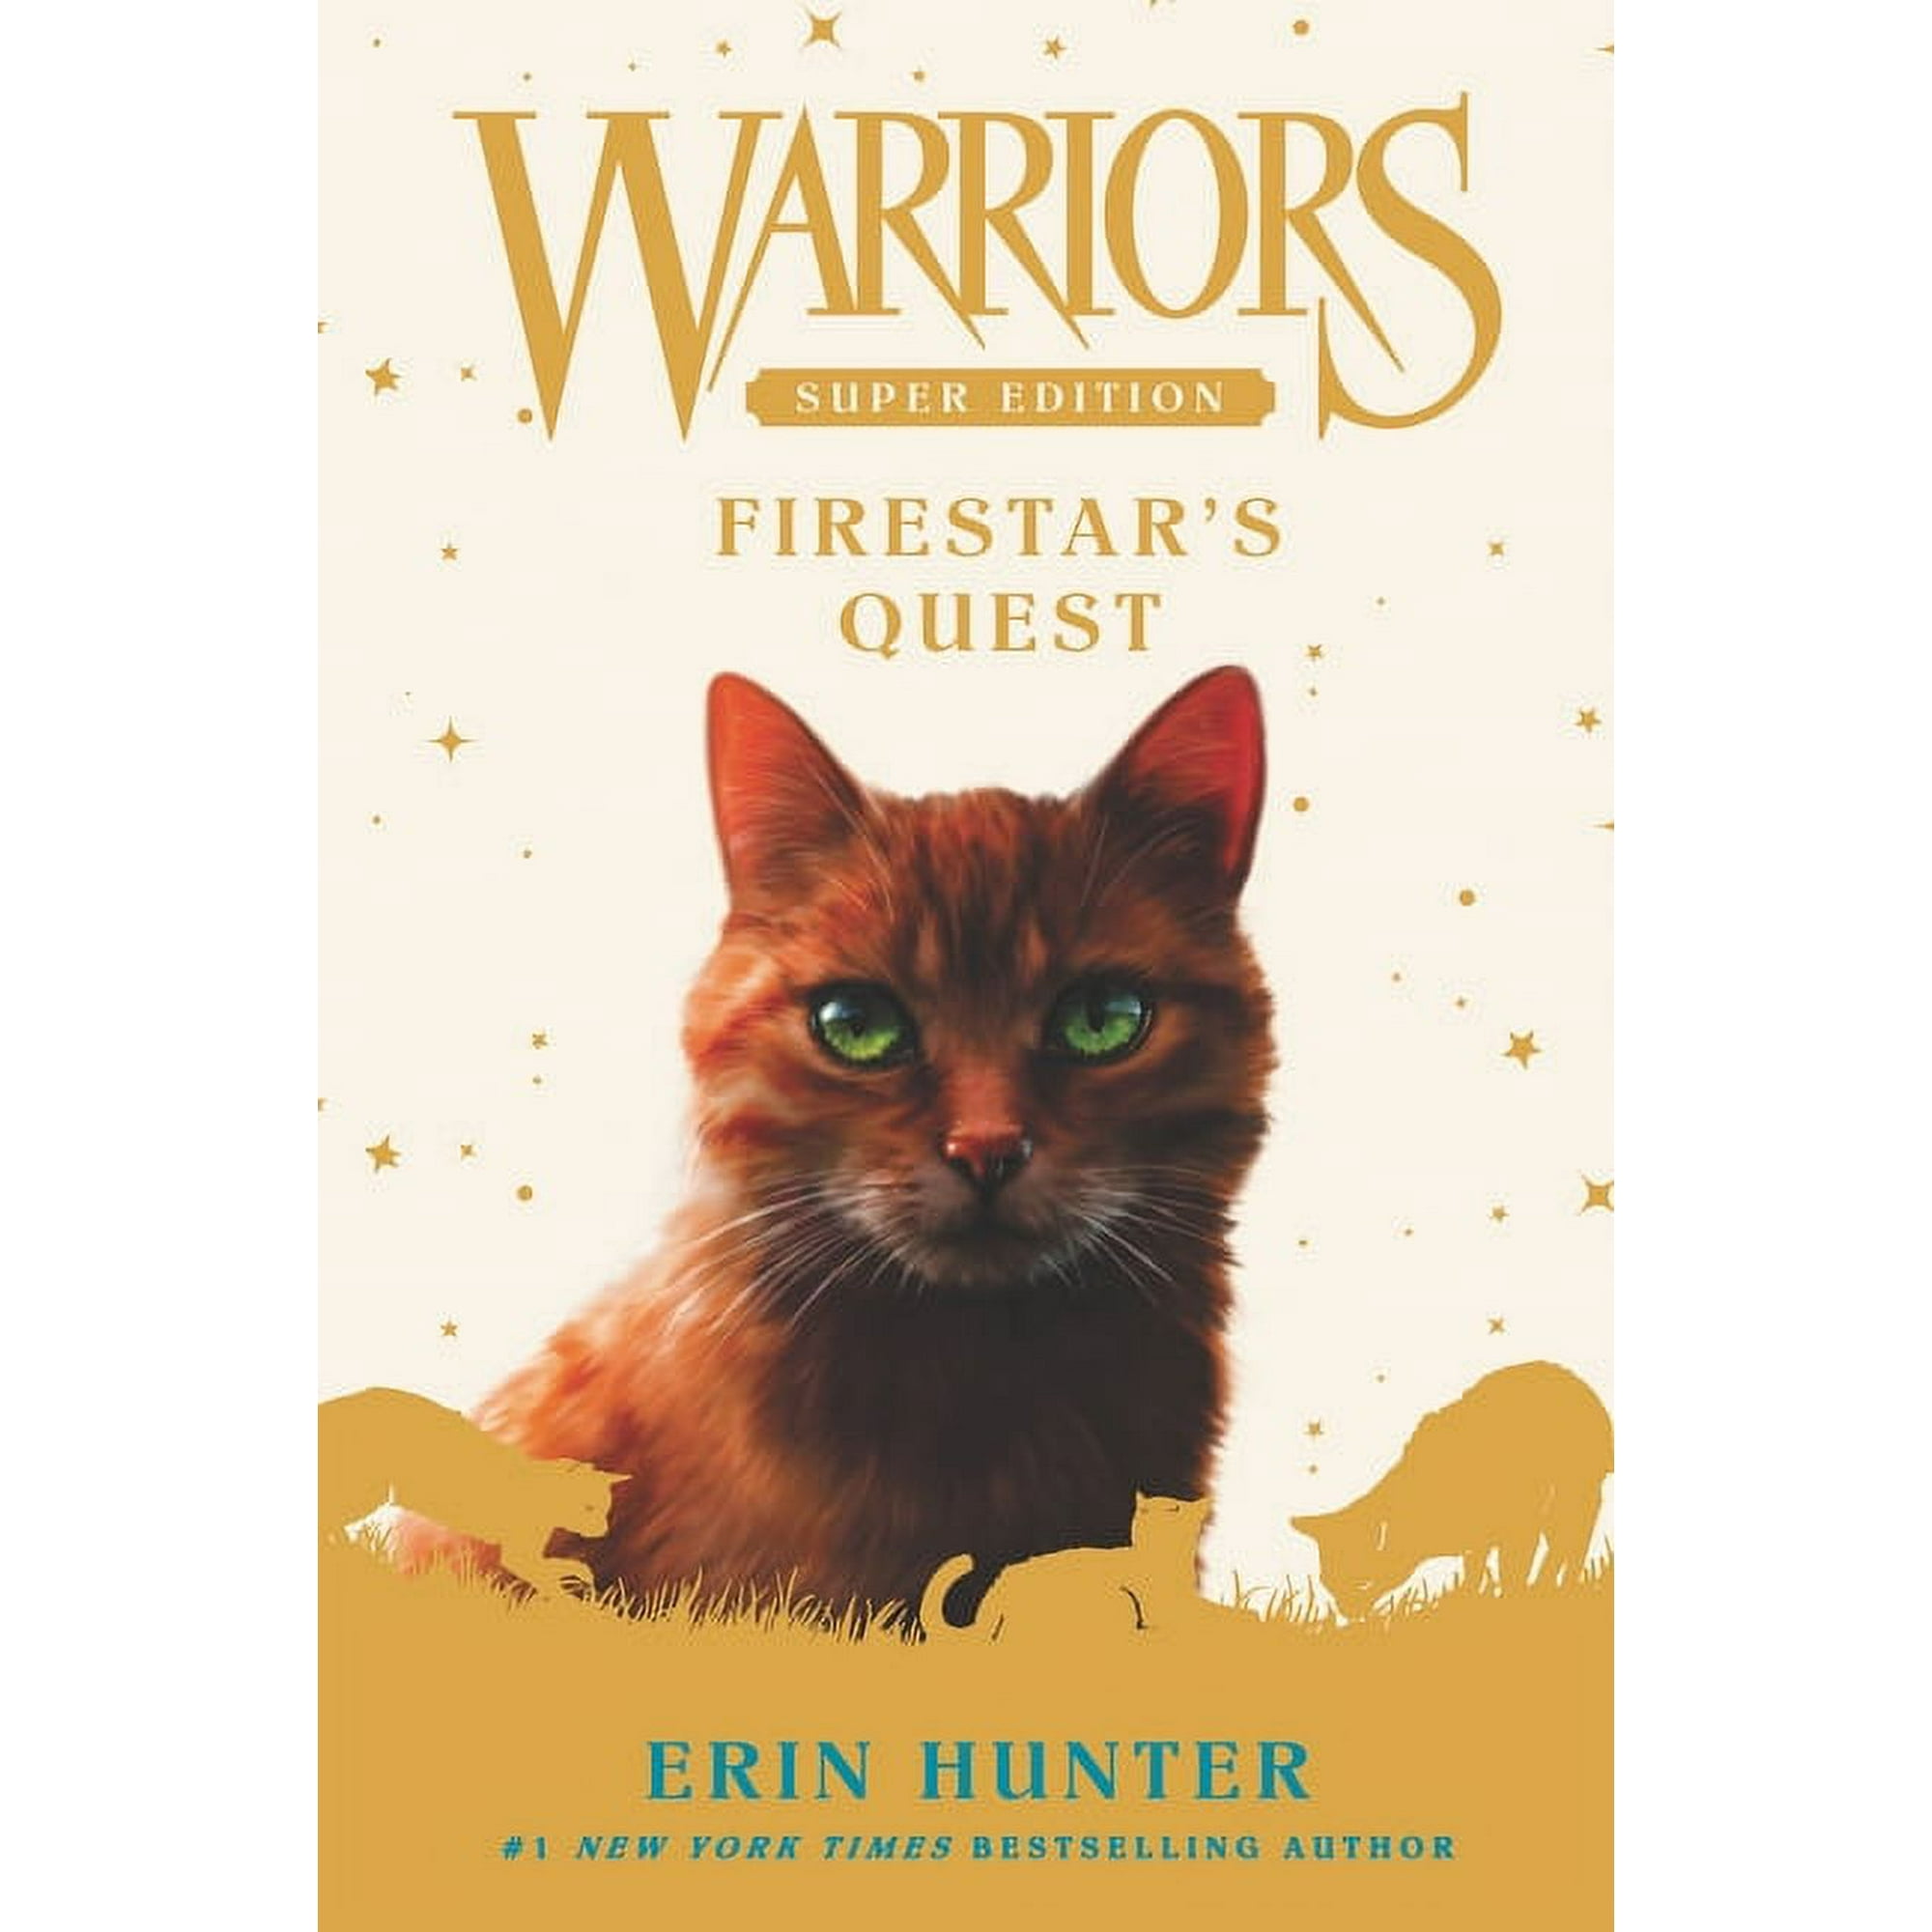 Now available in the Warriors store - Erin Hunter Books